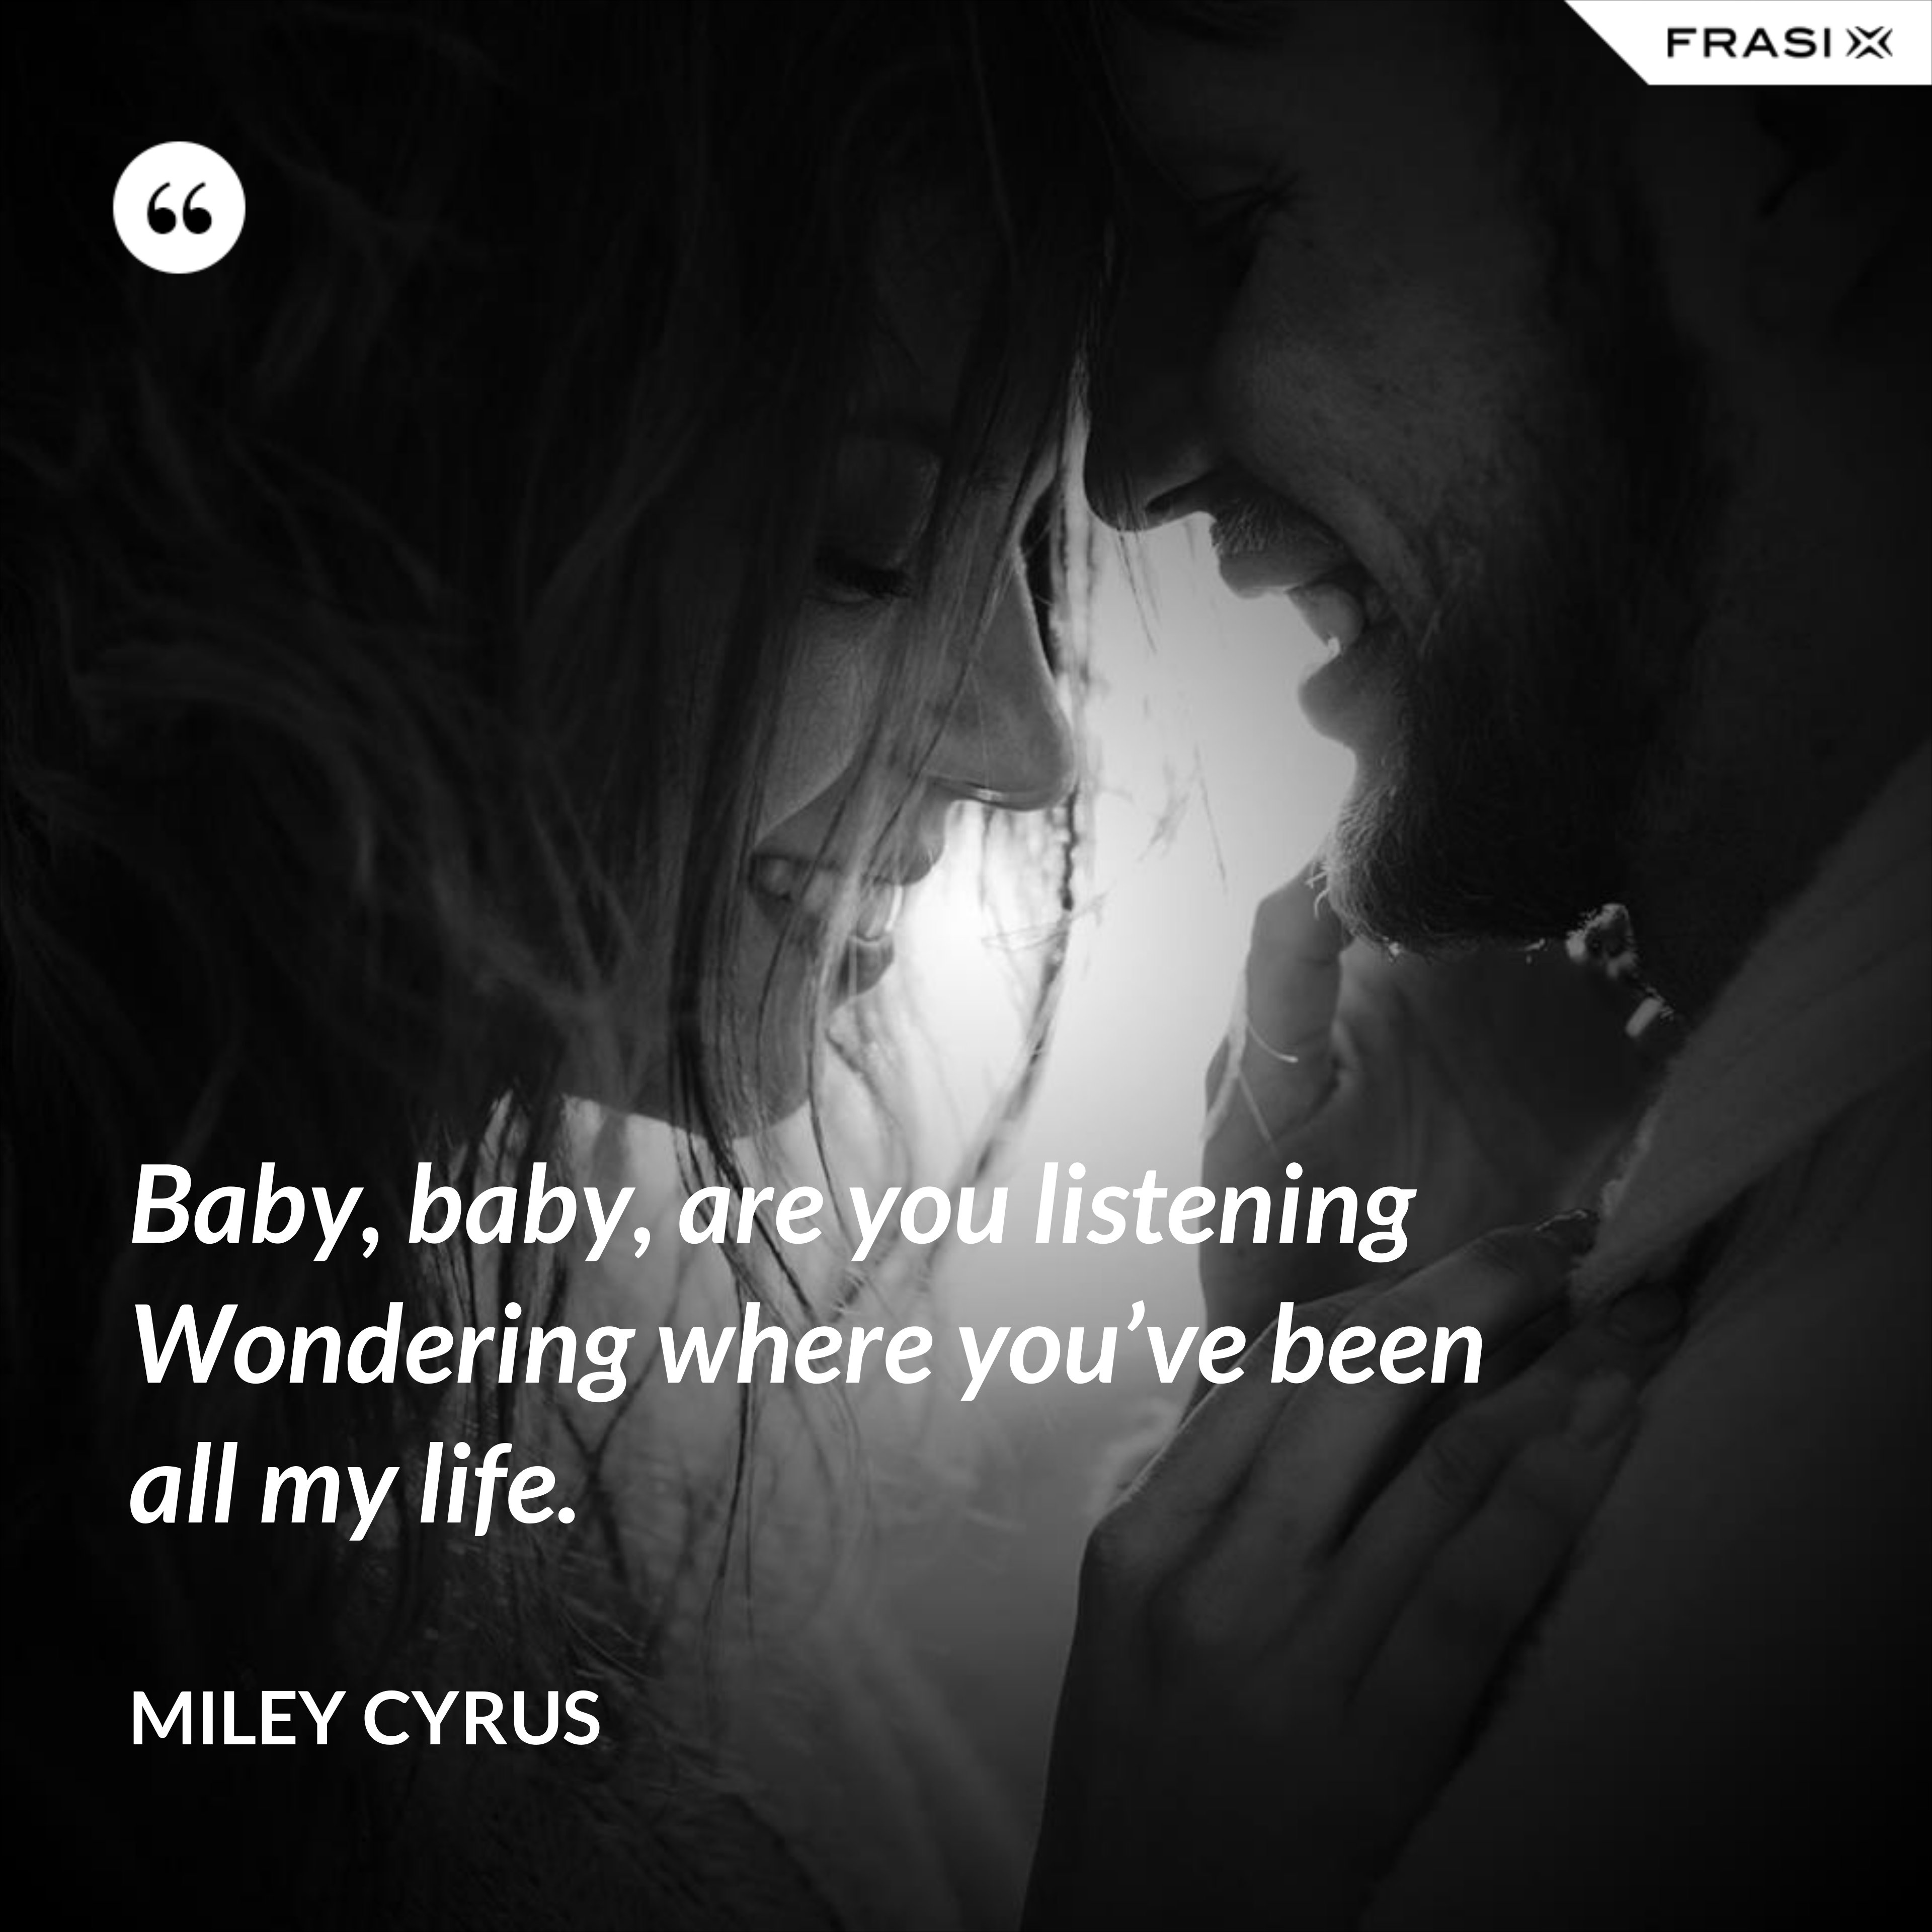 Baby, baby, are you listening Wondering where you’ve been all my life. - Miley Cyrus